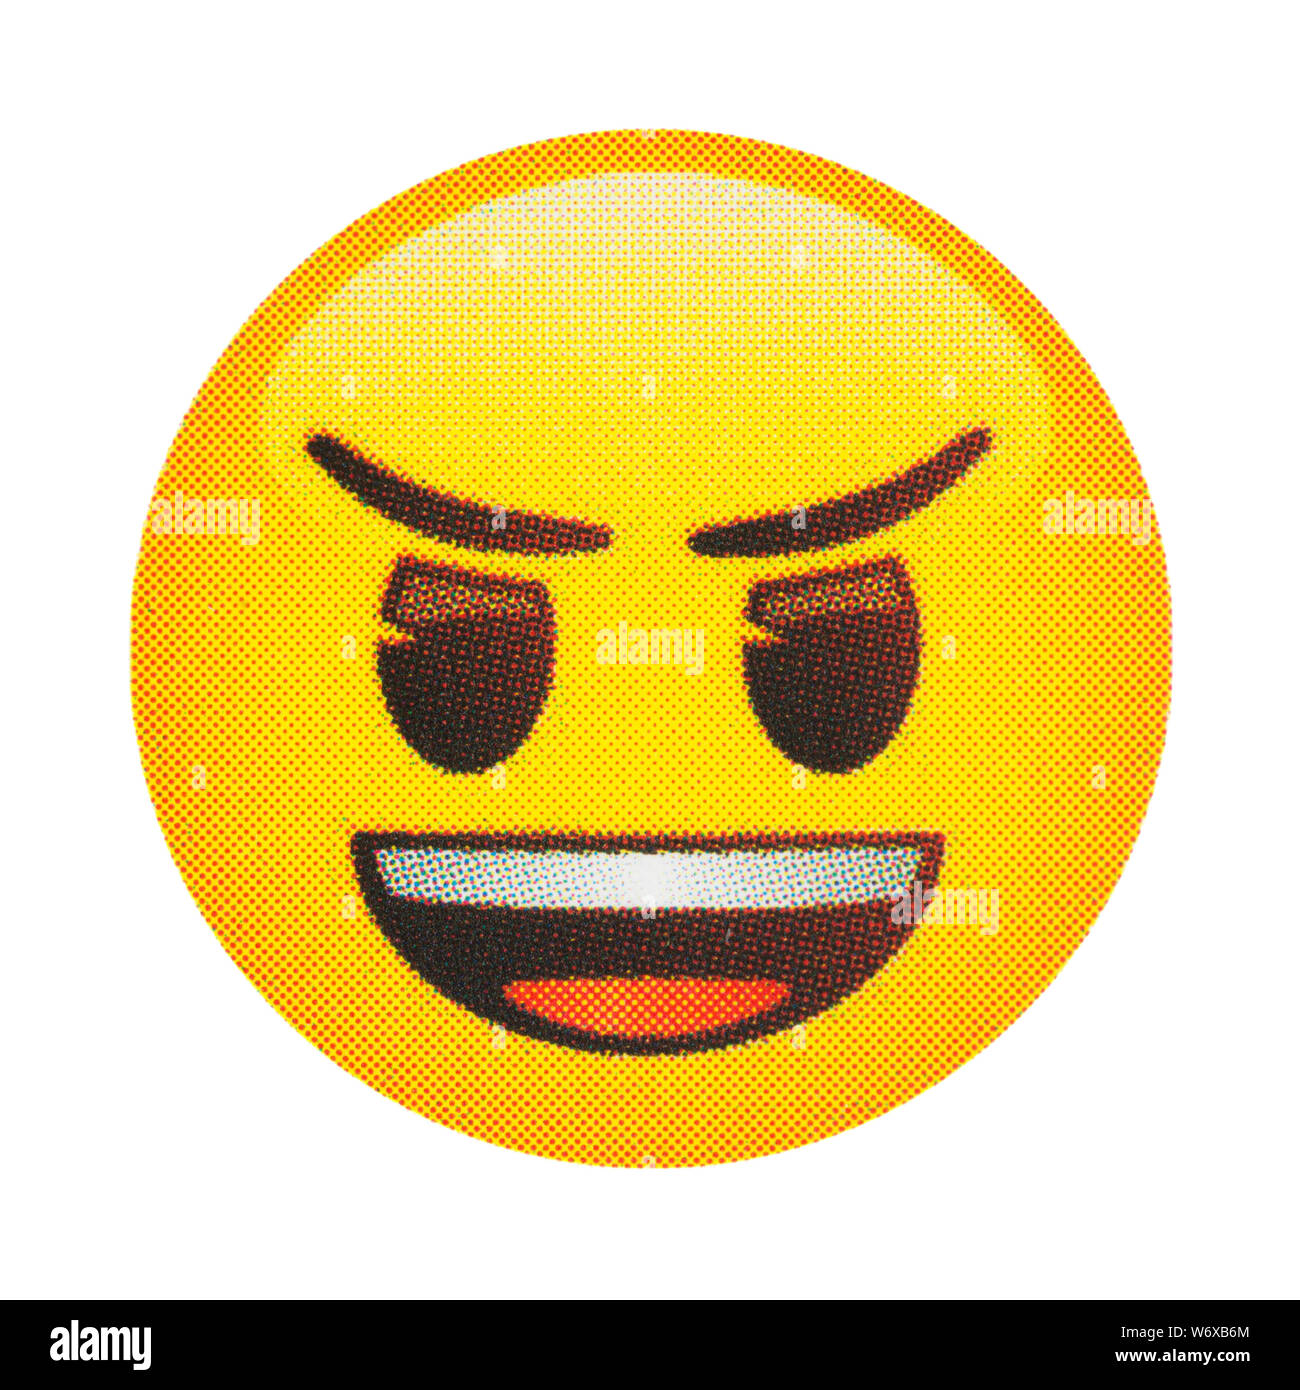 Smiling face with open mouth emoticon Stock Photo